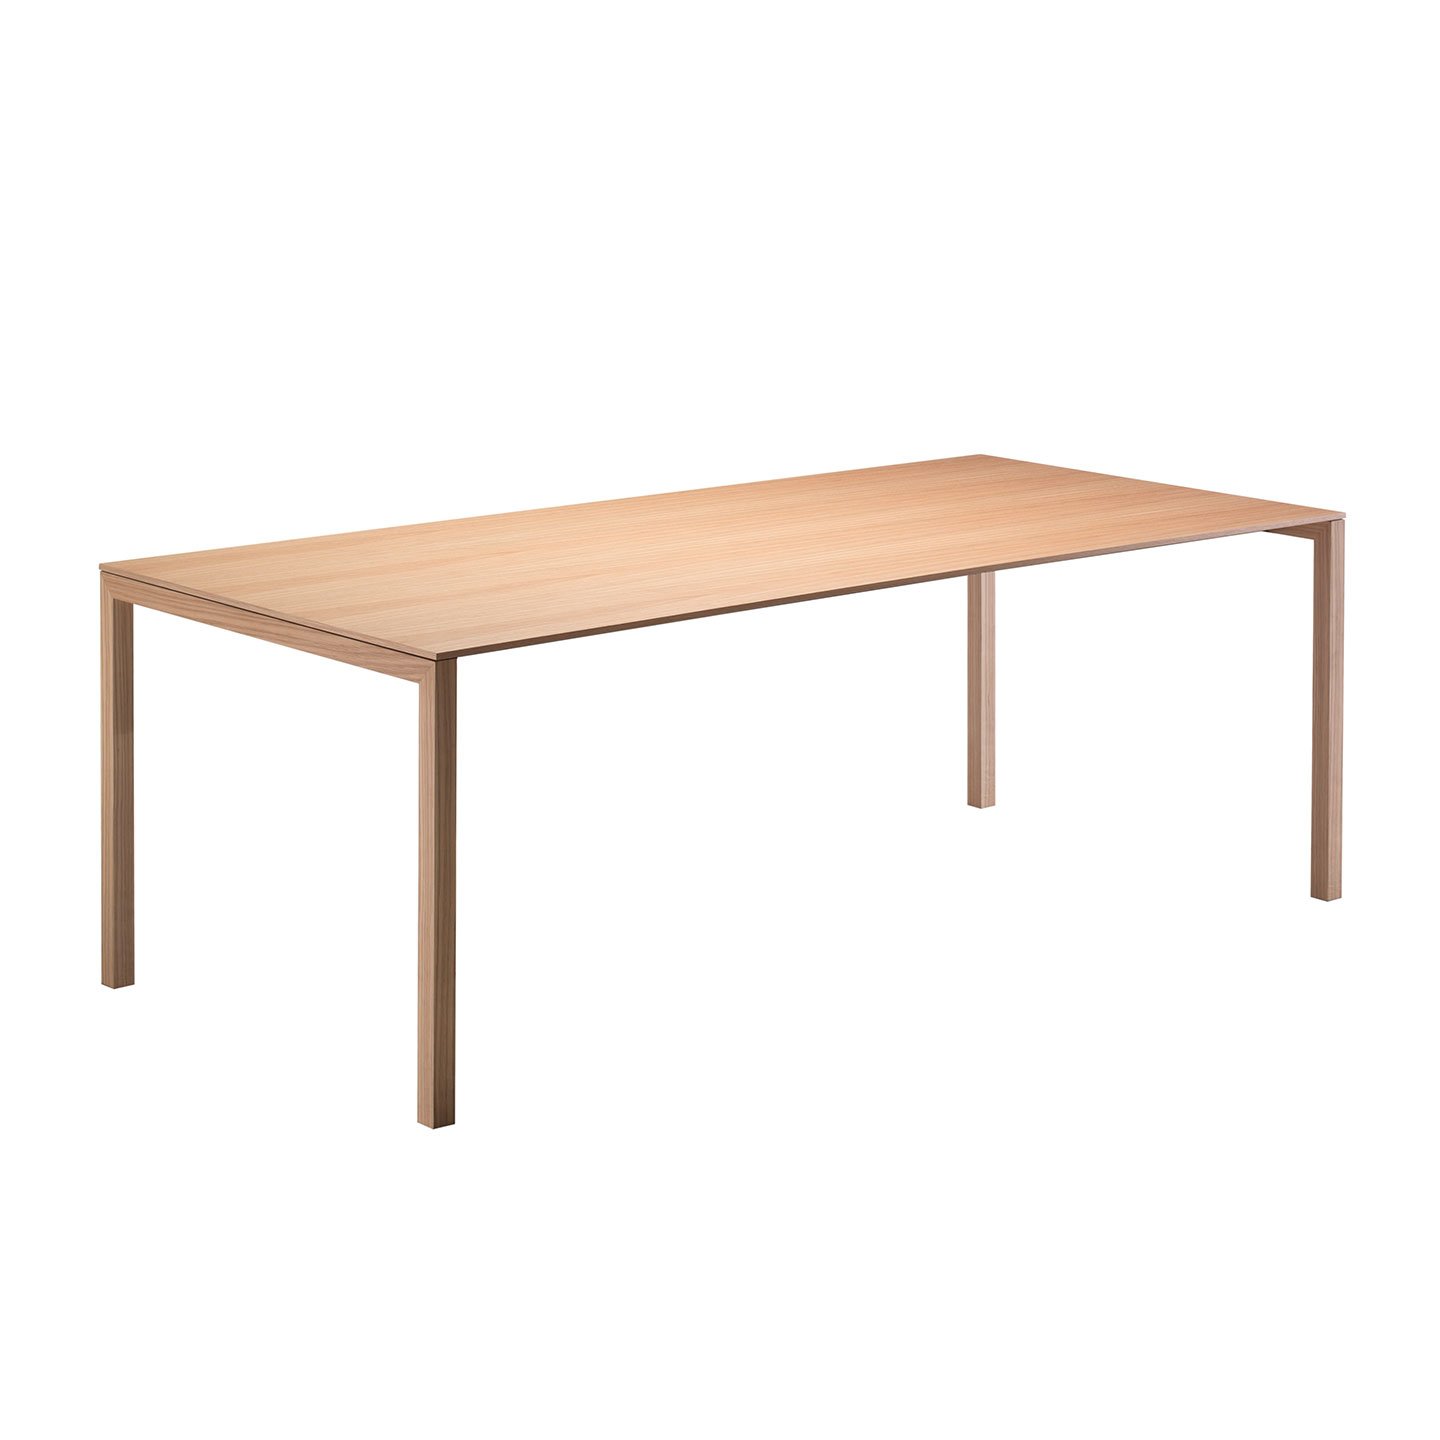 Haworth Naan Table with Natural Oak wood rectangular top and 4 legs